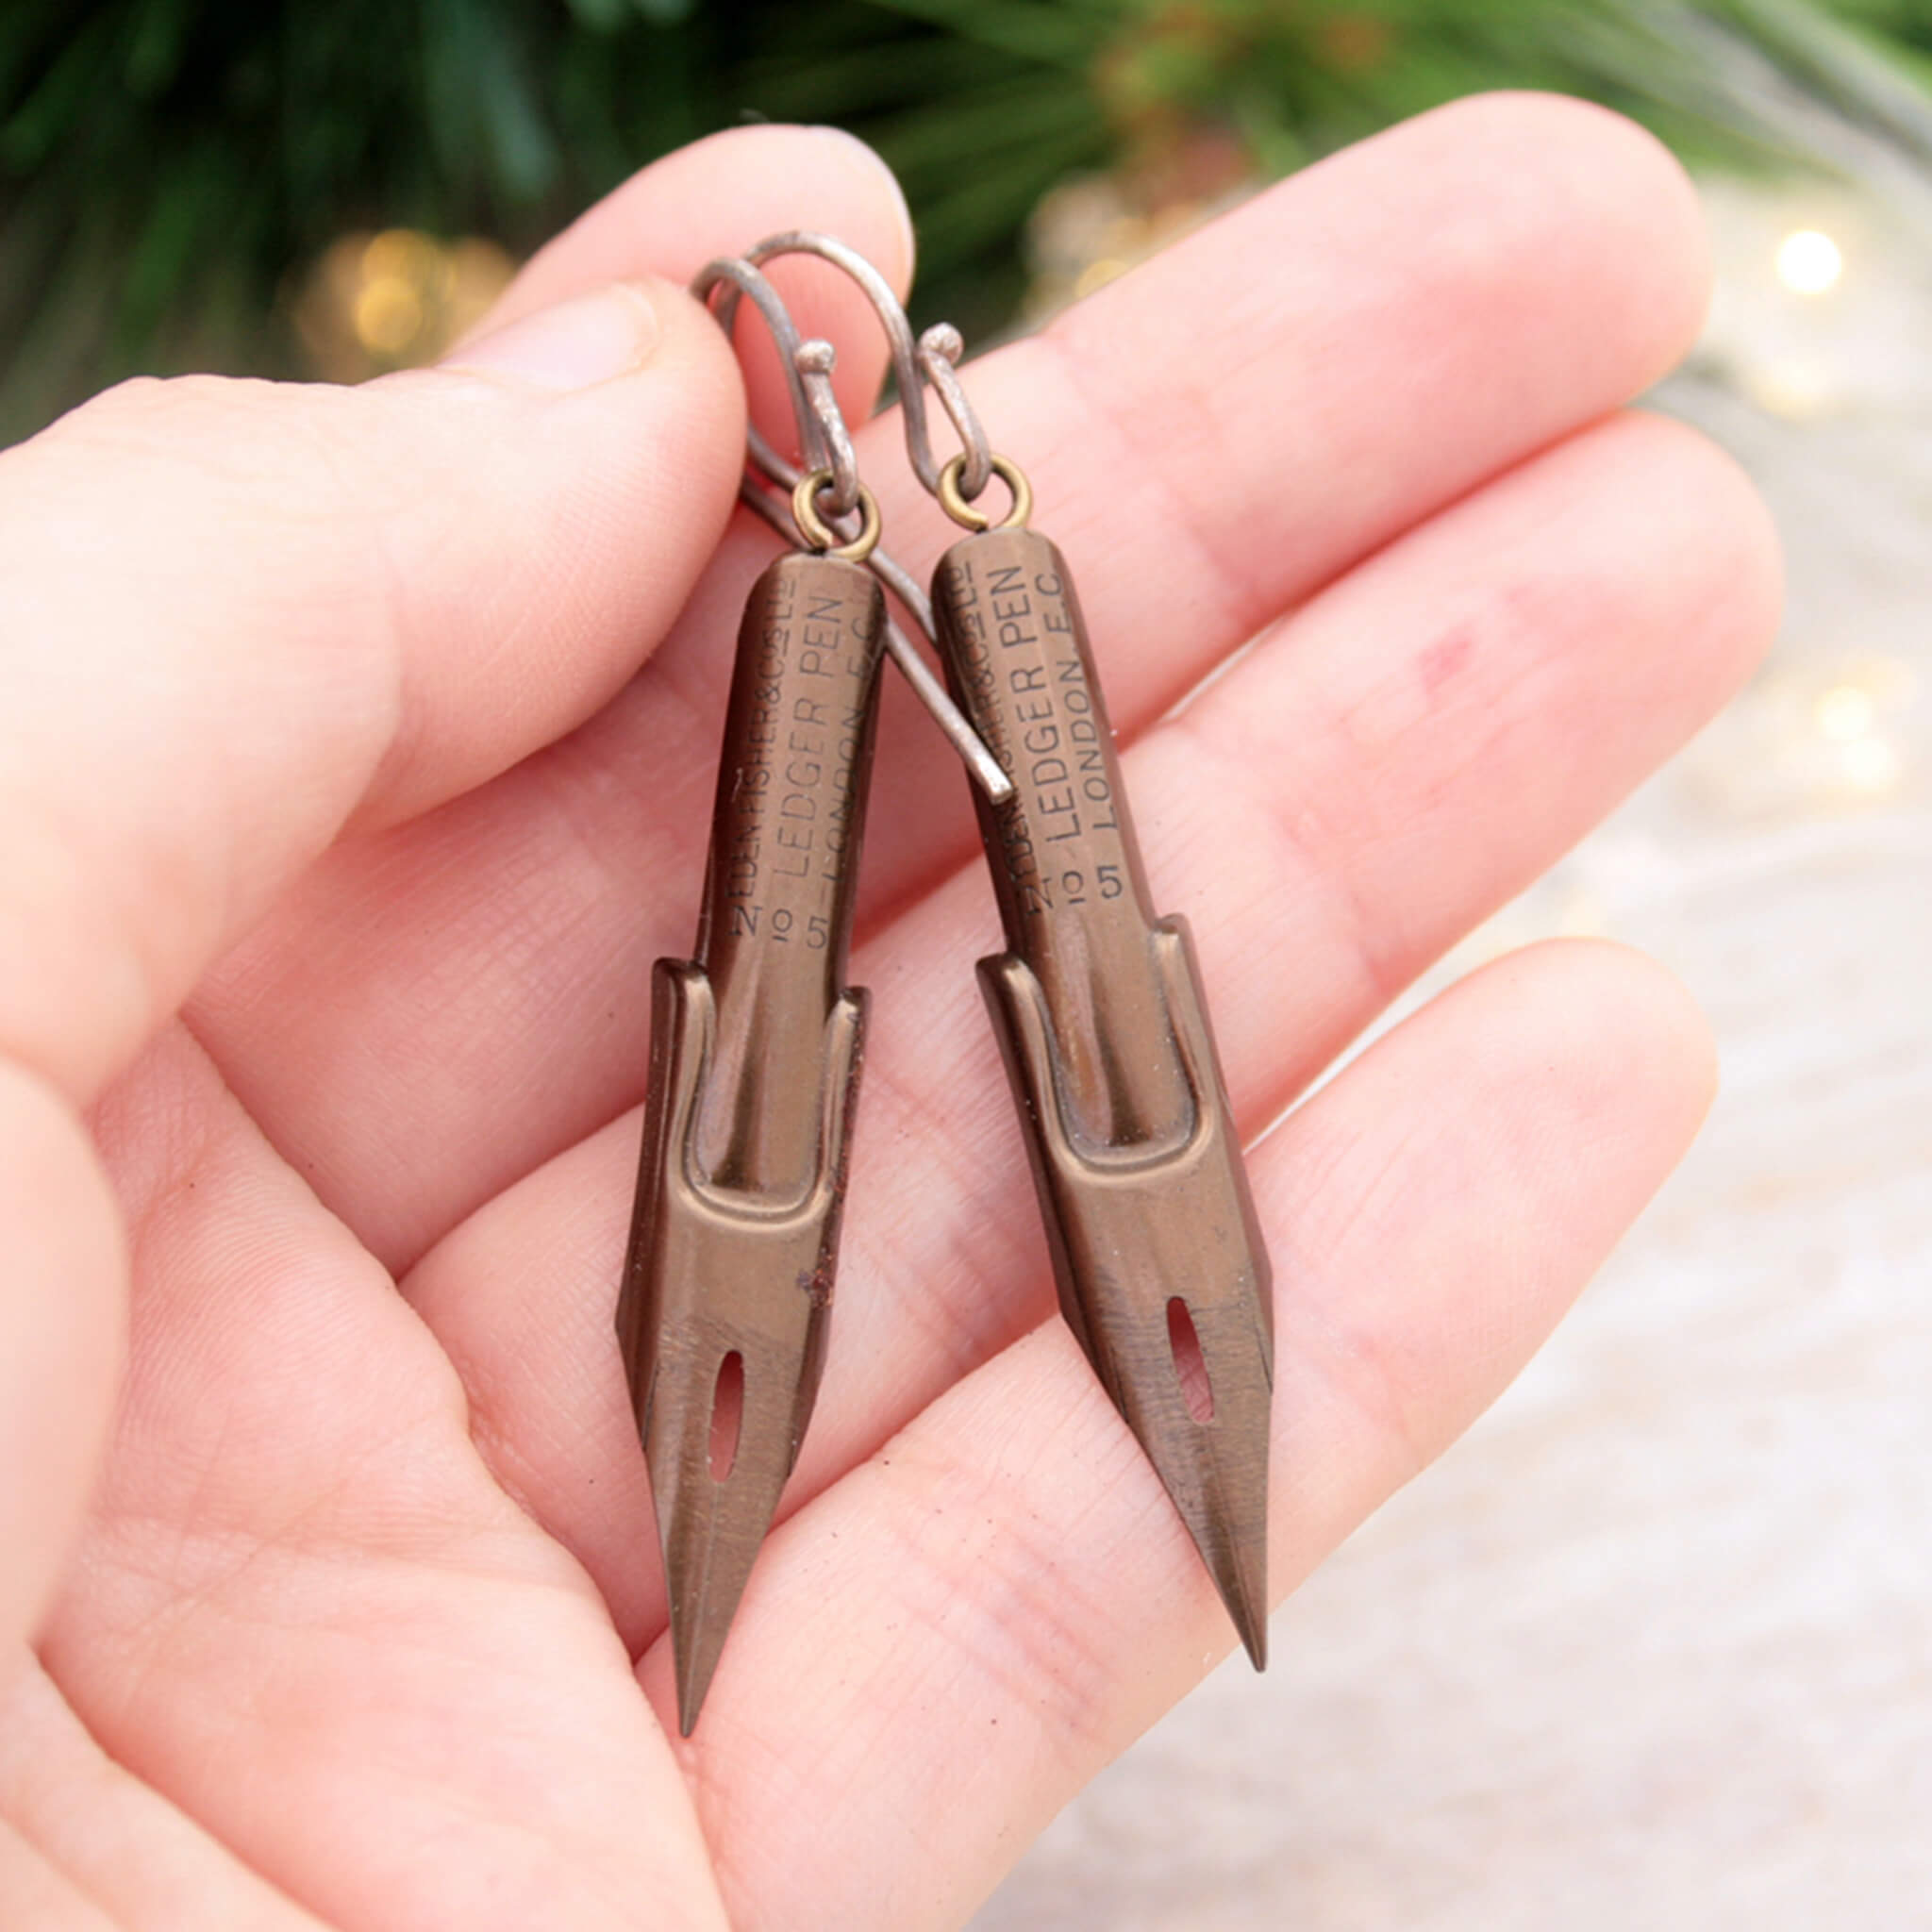 dark academia earrings made of pen nibs in bronze colour being hold in hand